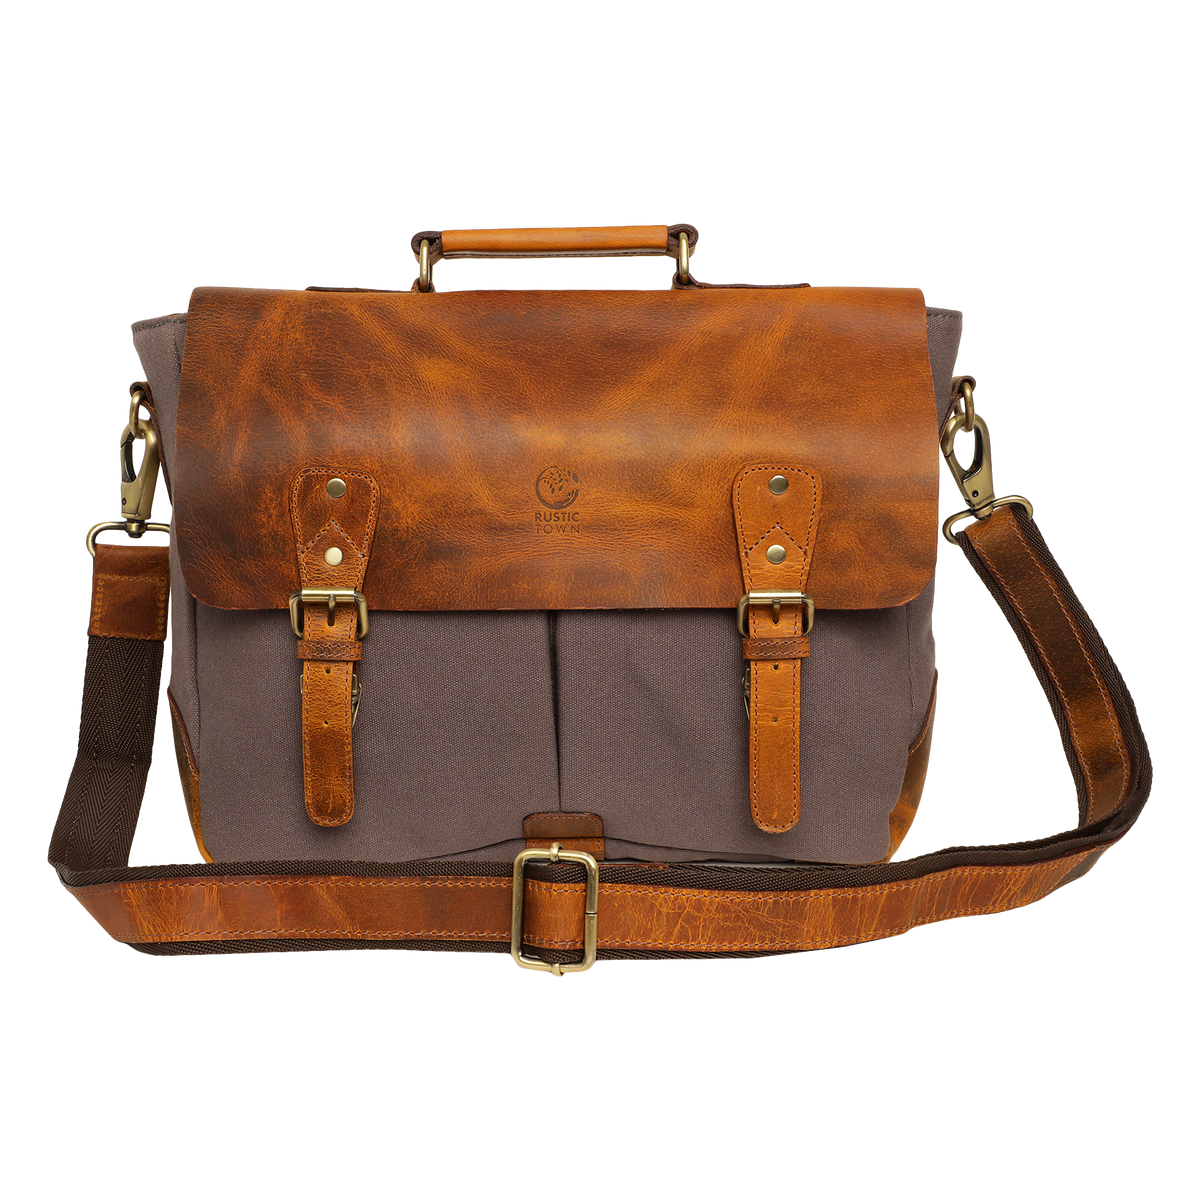 Shop All Bags, Leather, Canvas